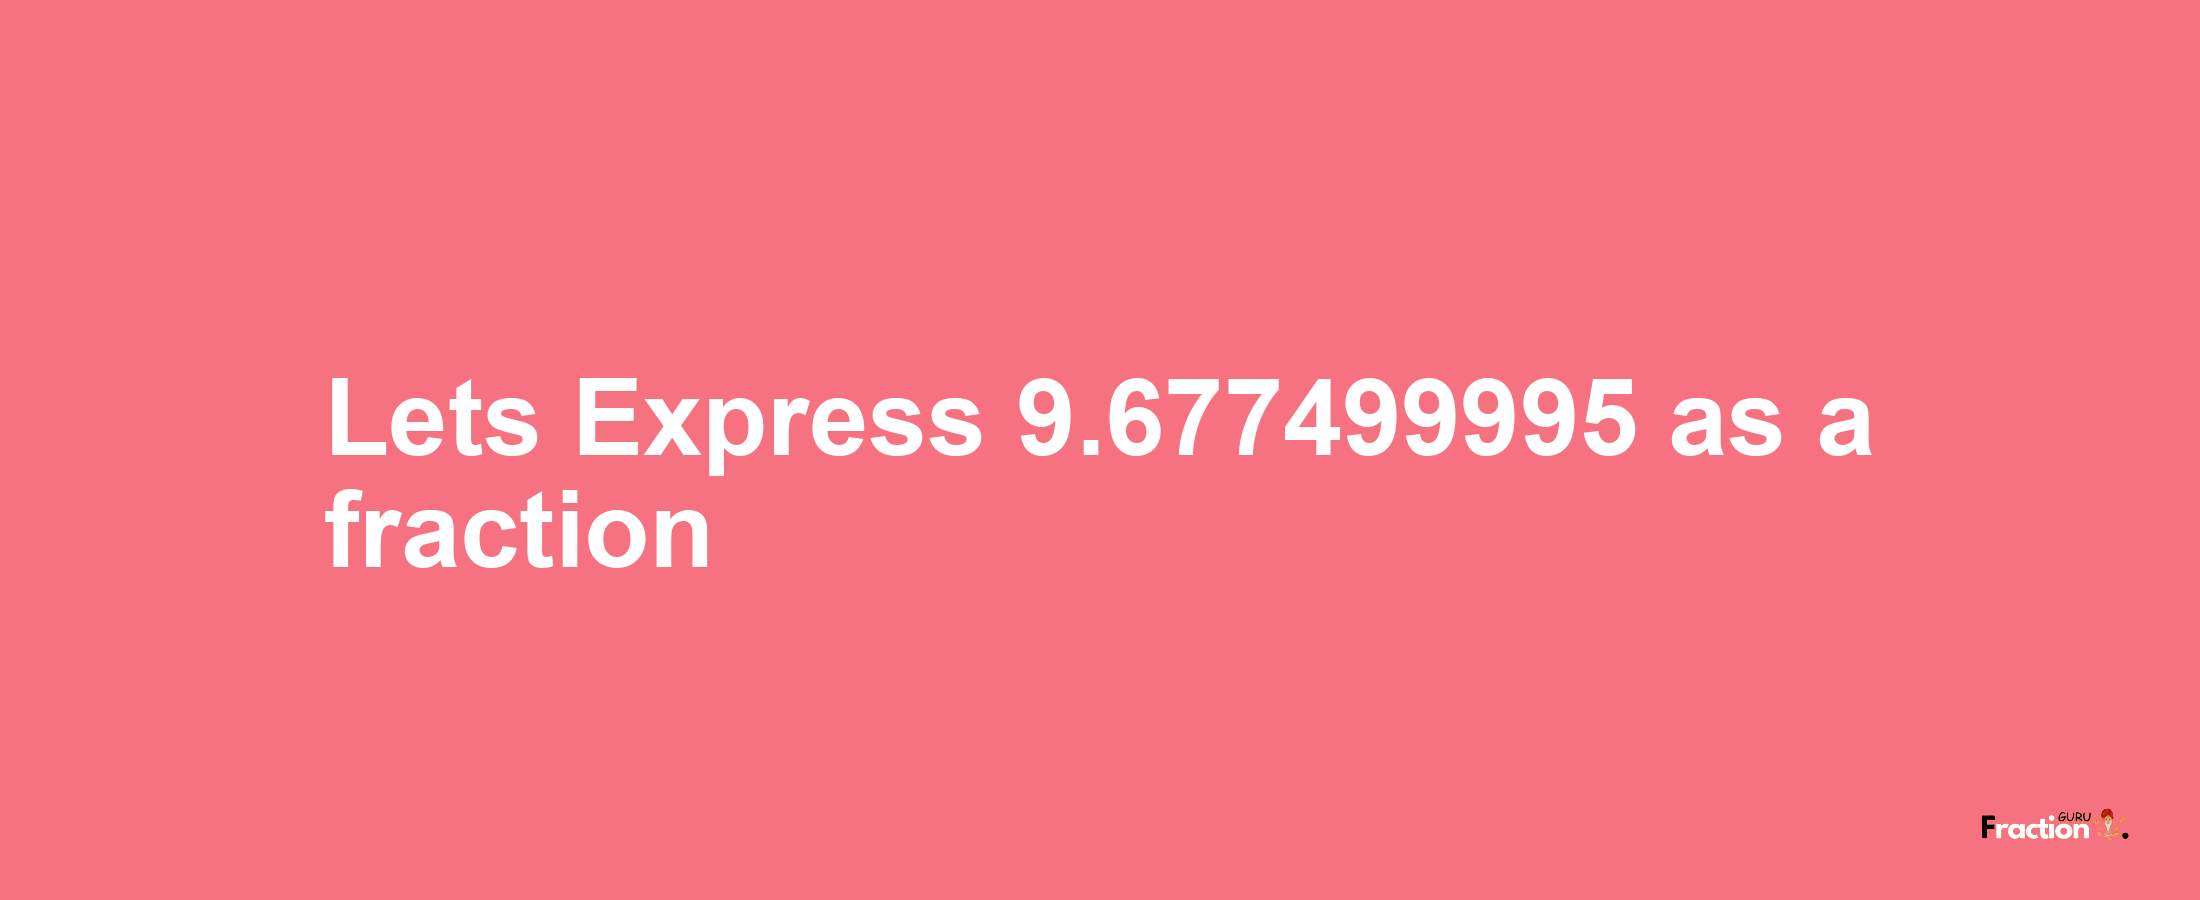 Lets Express 9.677499995 as afraction